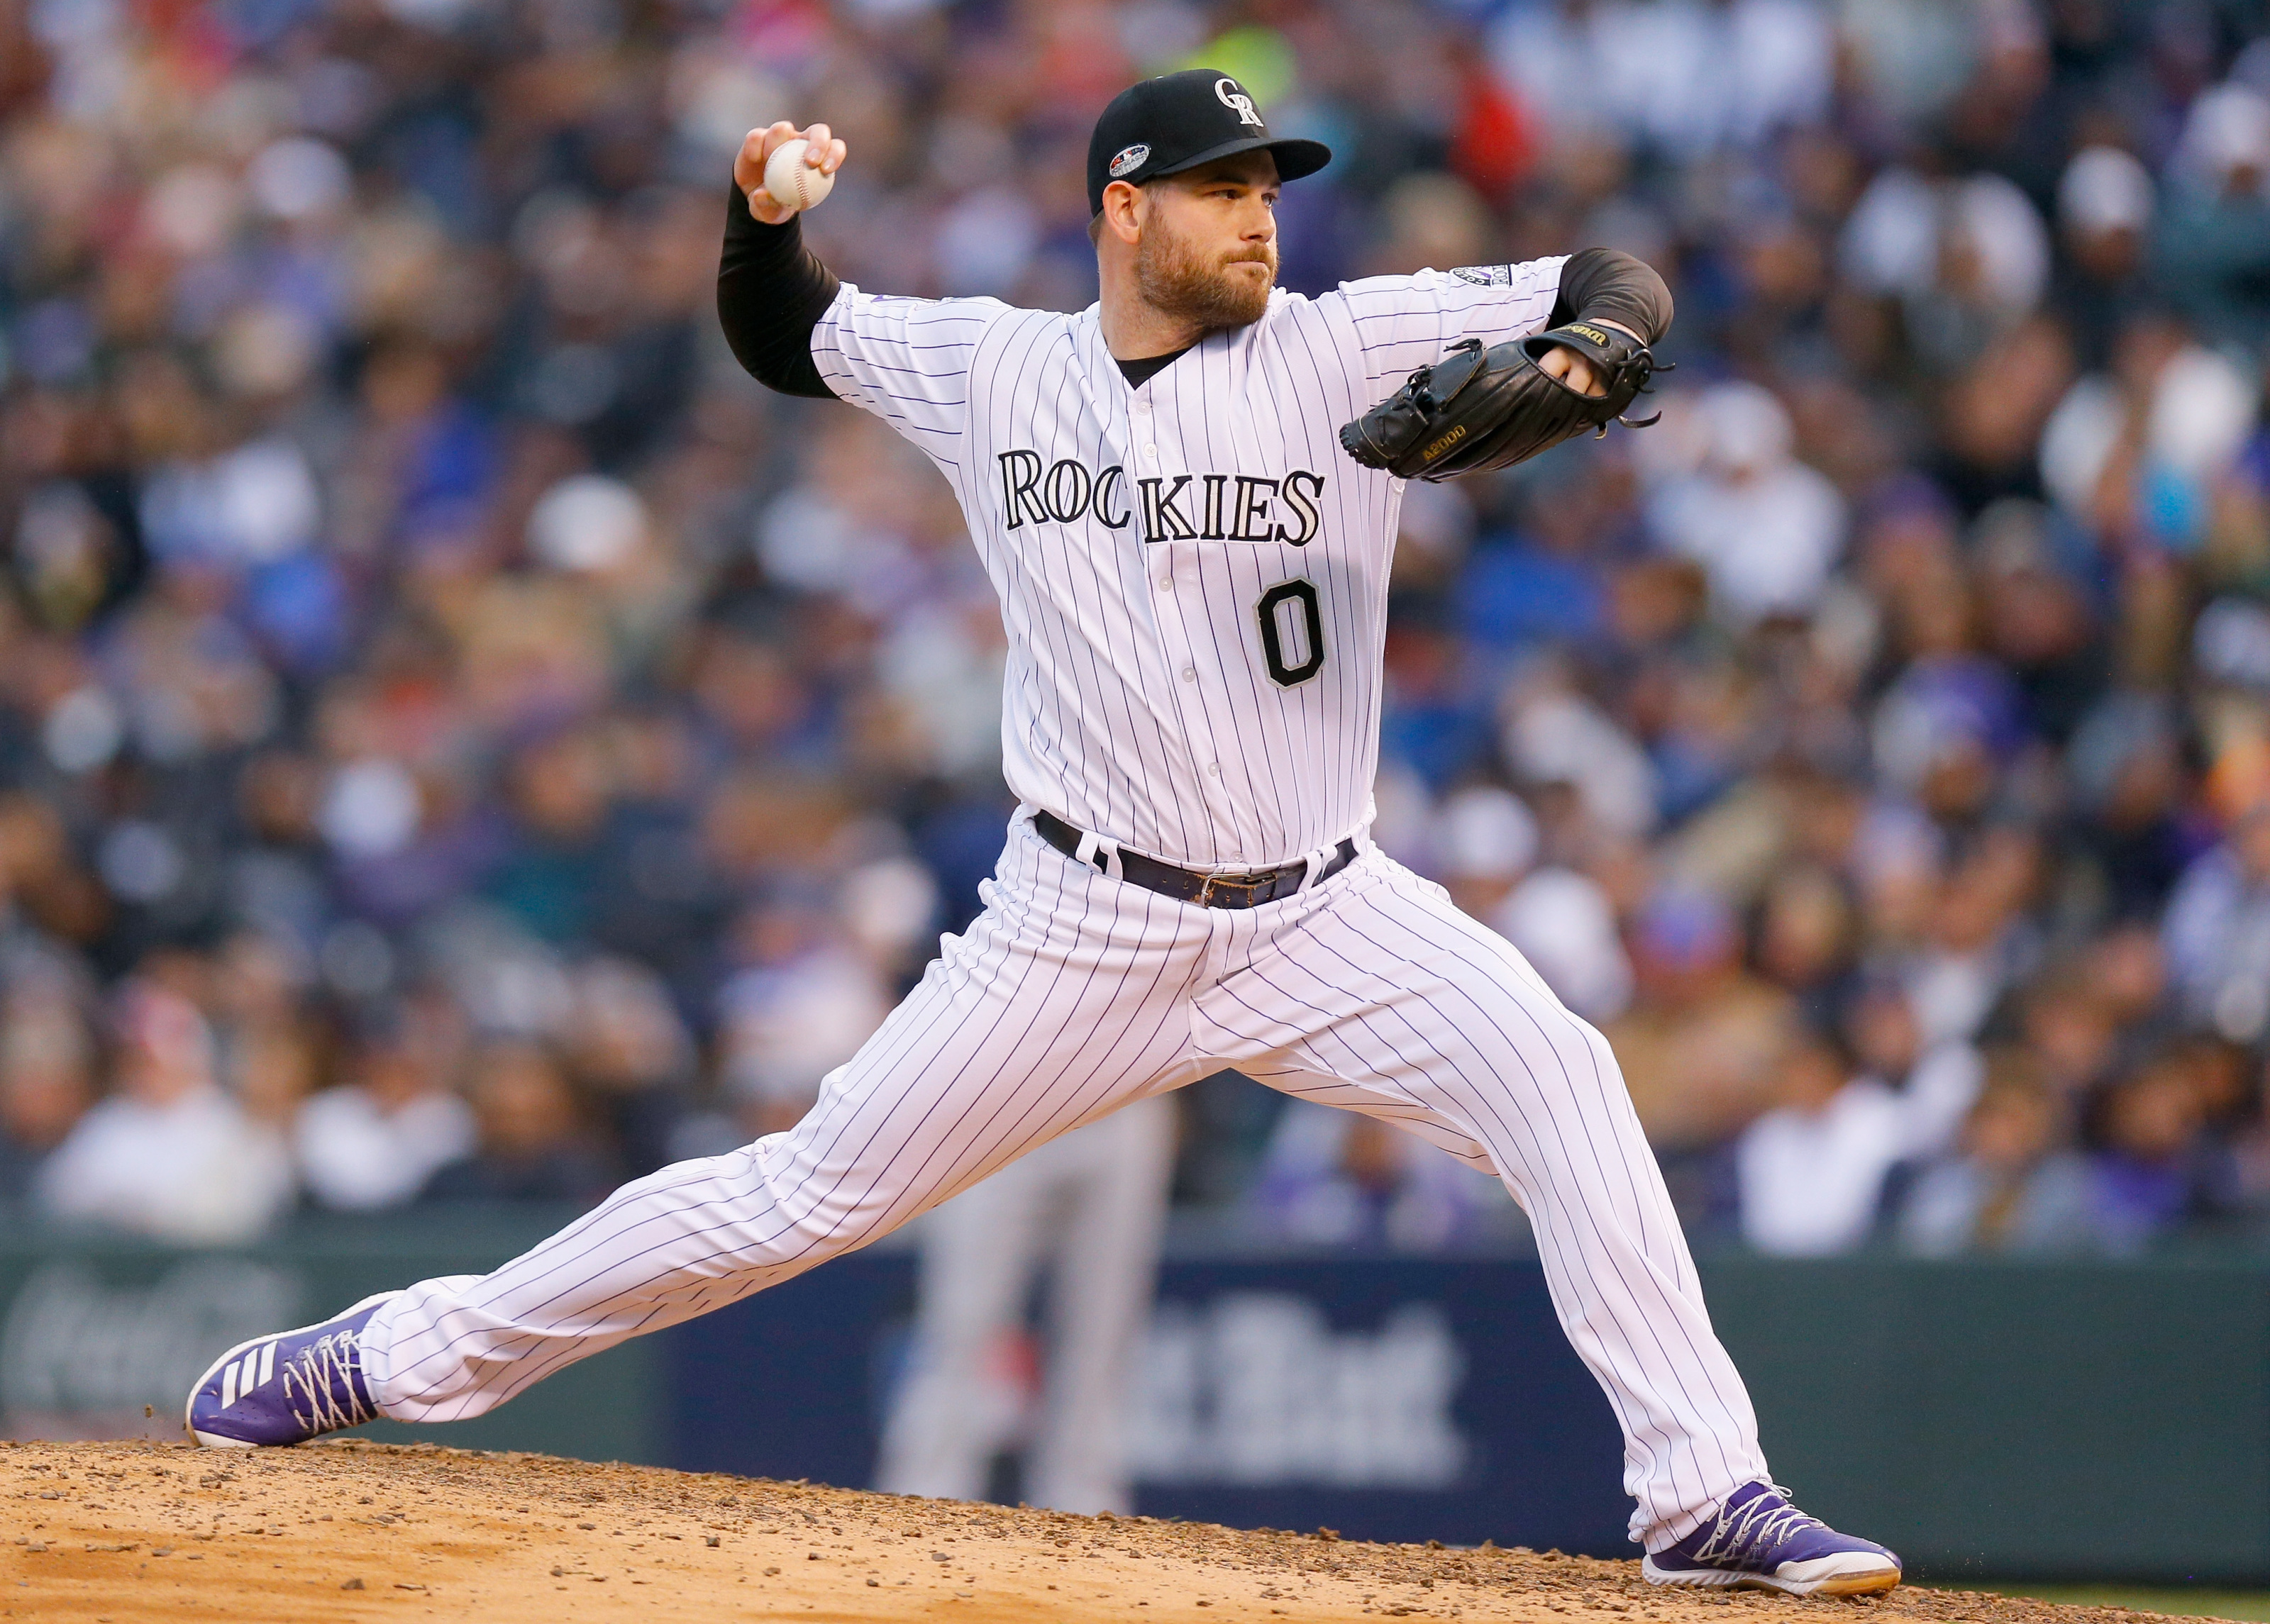 Adam Ottavino opens up about pitching for both New York teams